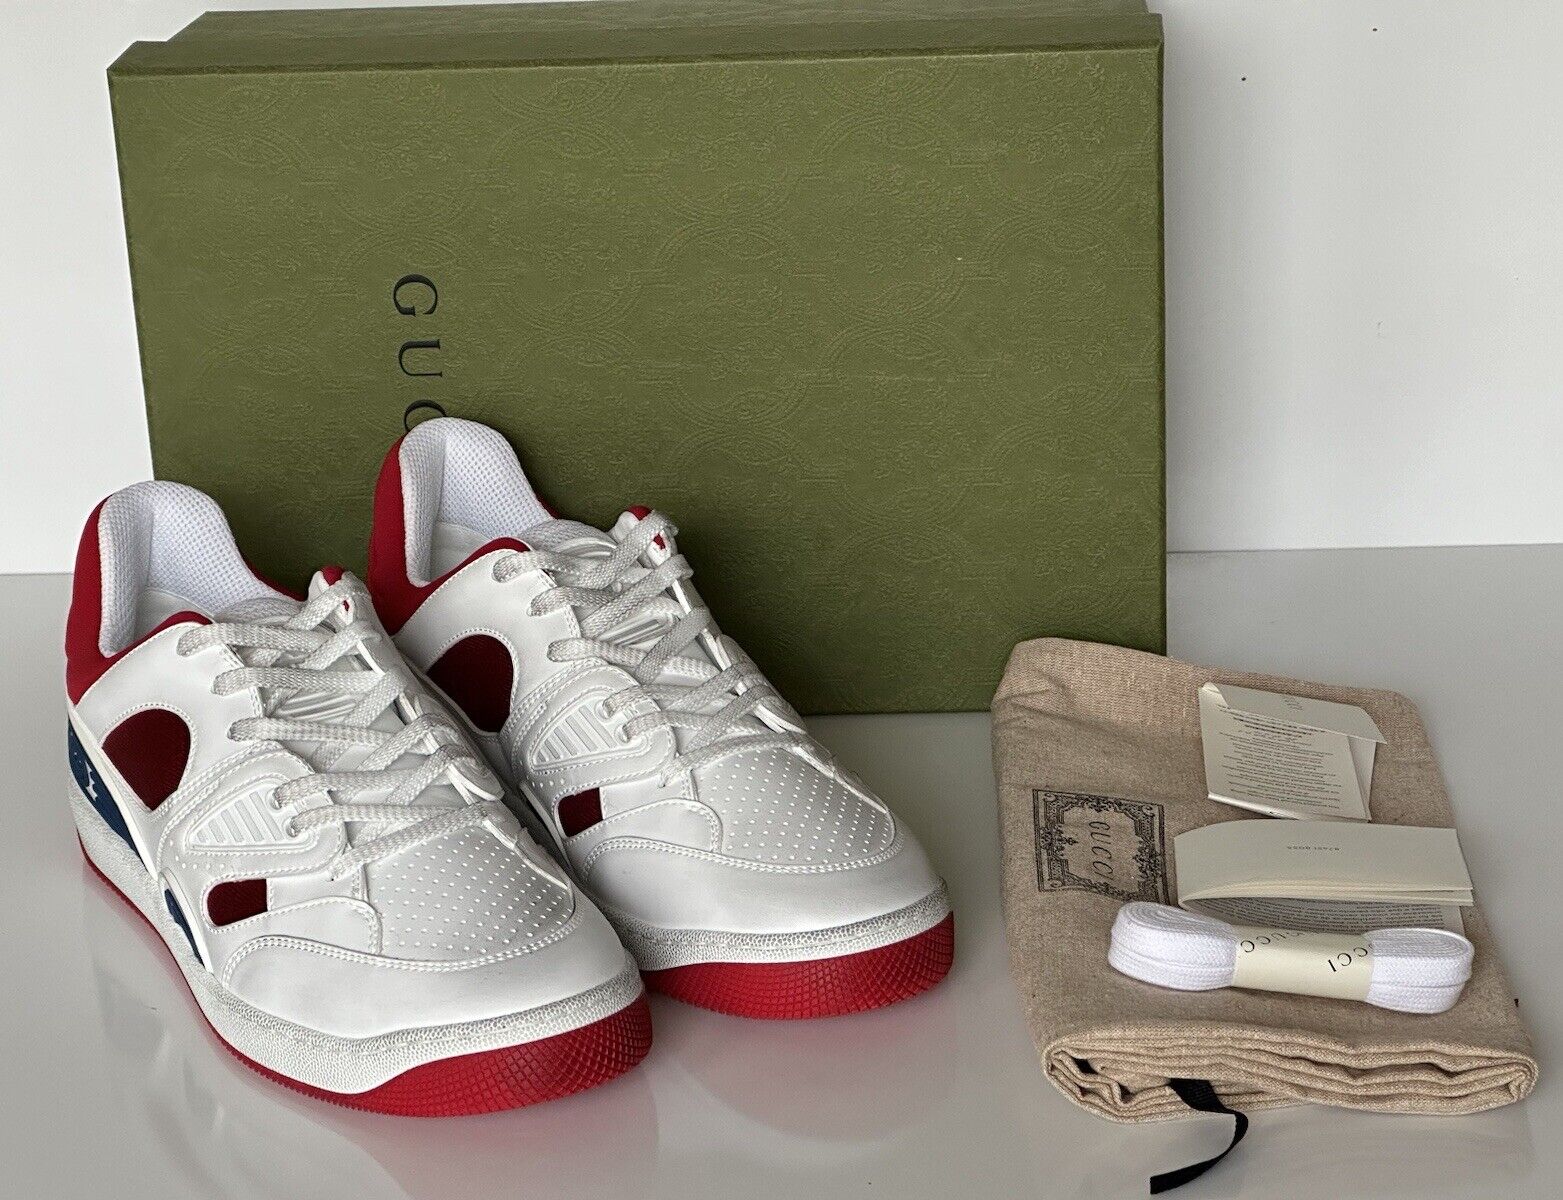 NIB Gucci Men's Low-top White/Red Leather Sneakers 10 US (Gucci 9.5G) 697882 IT